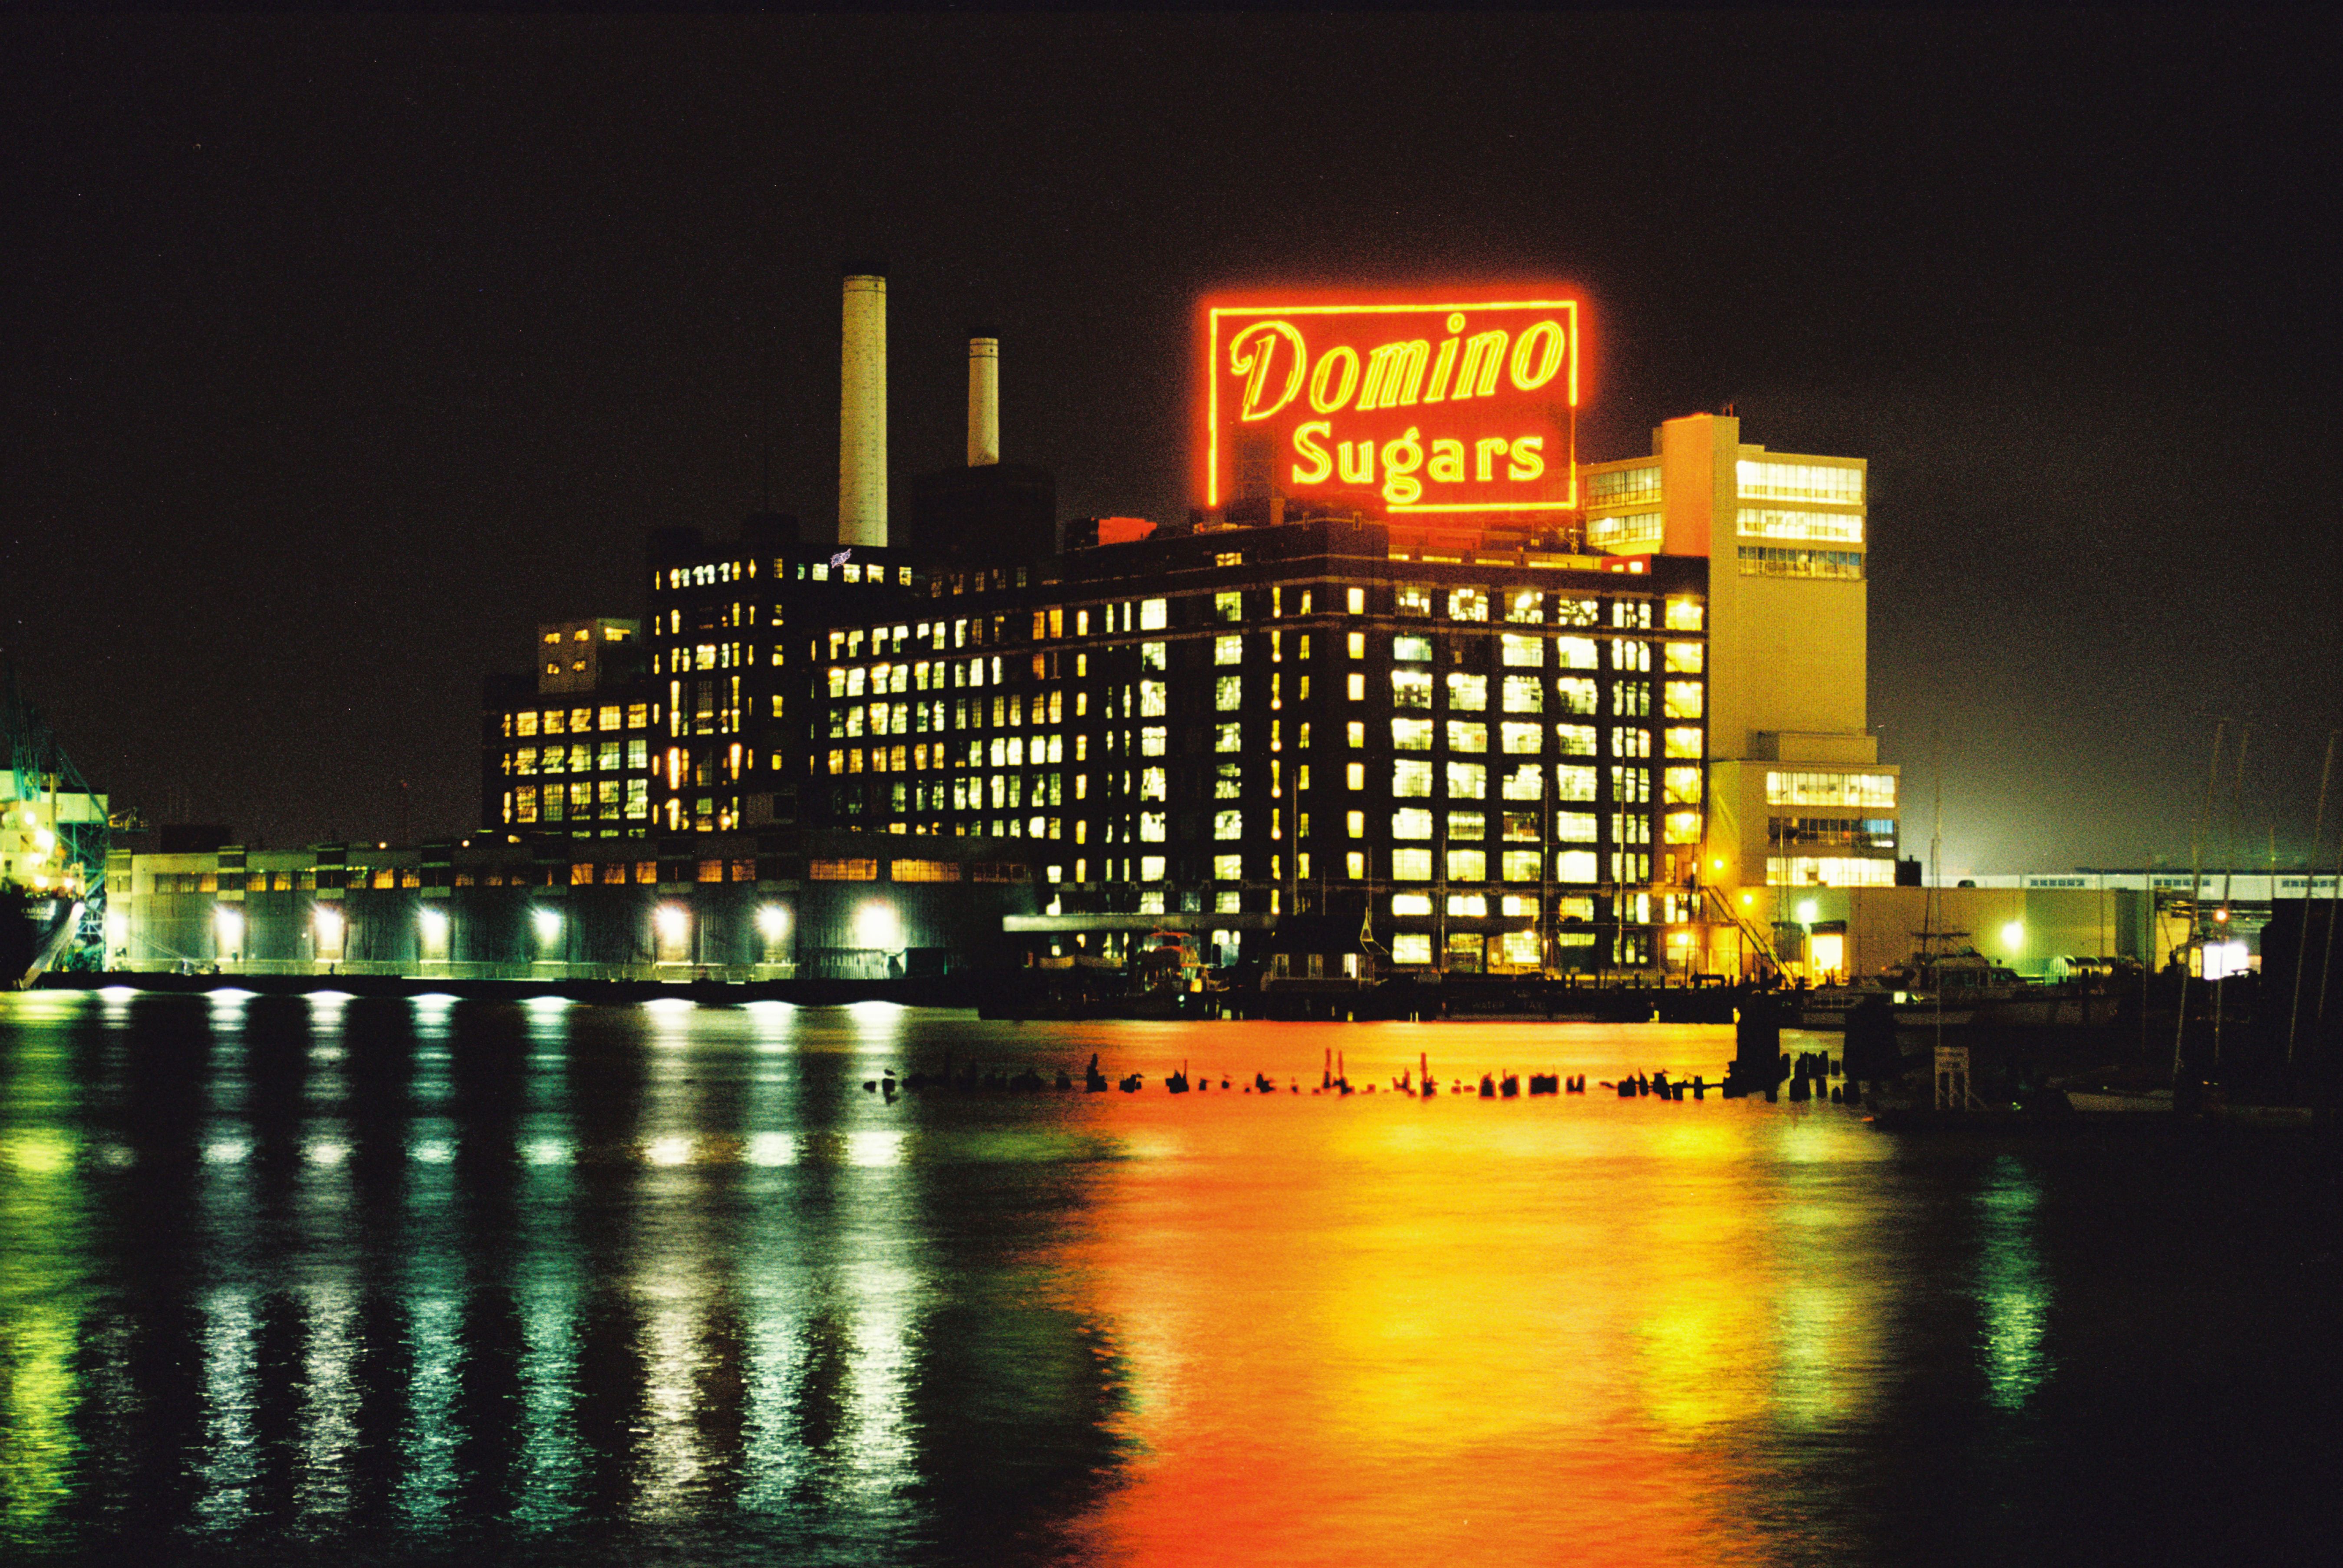 The iconic Domino Sugars sign shines brightly from across the Inner ...